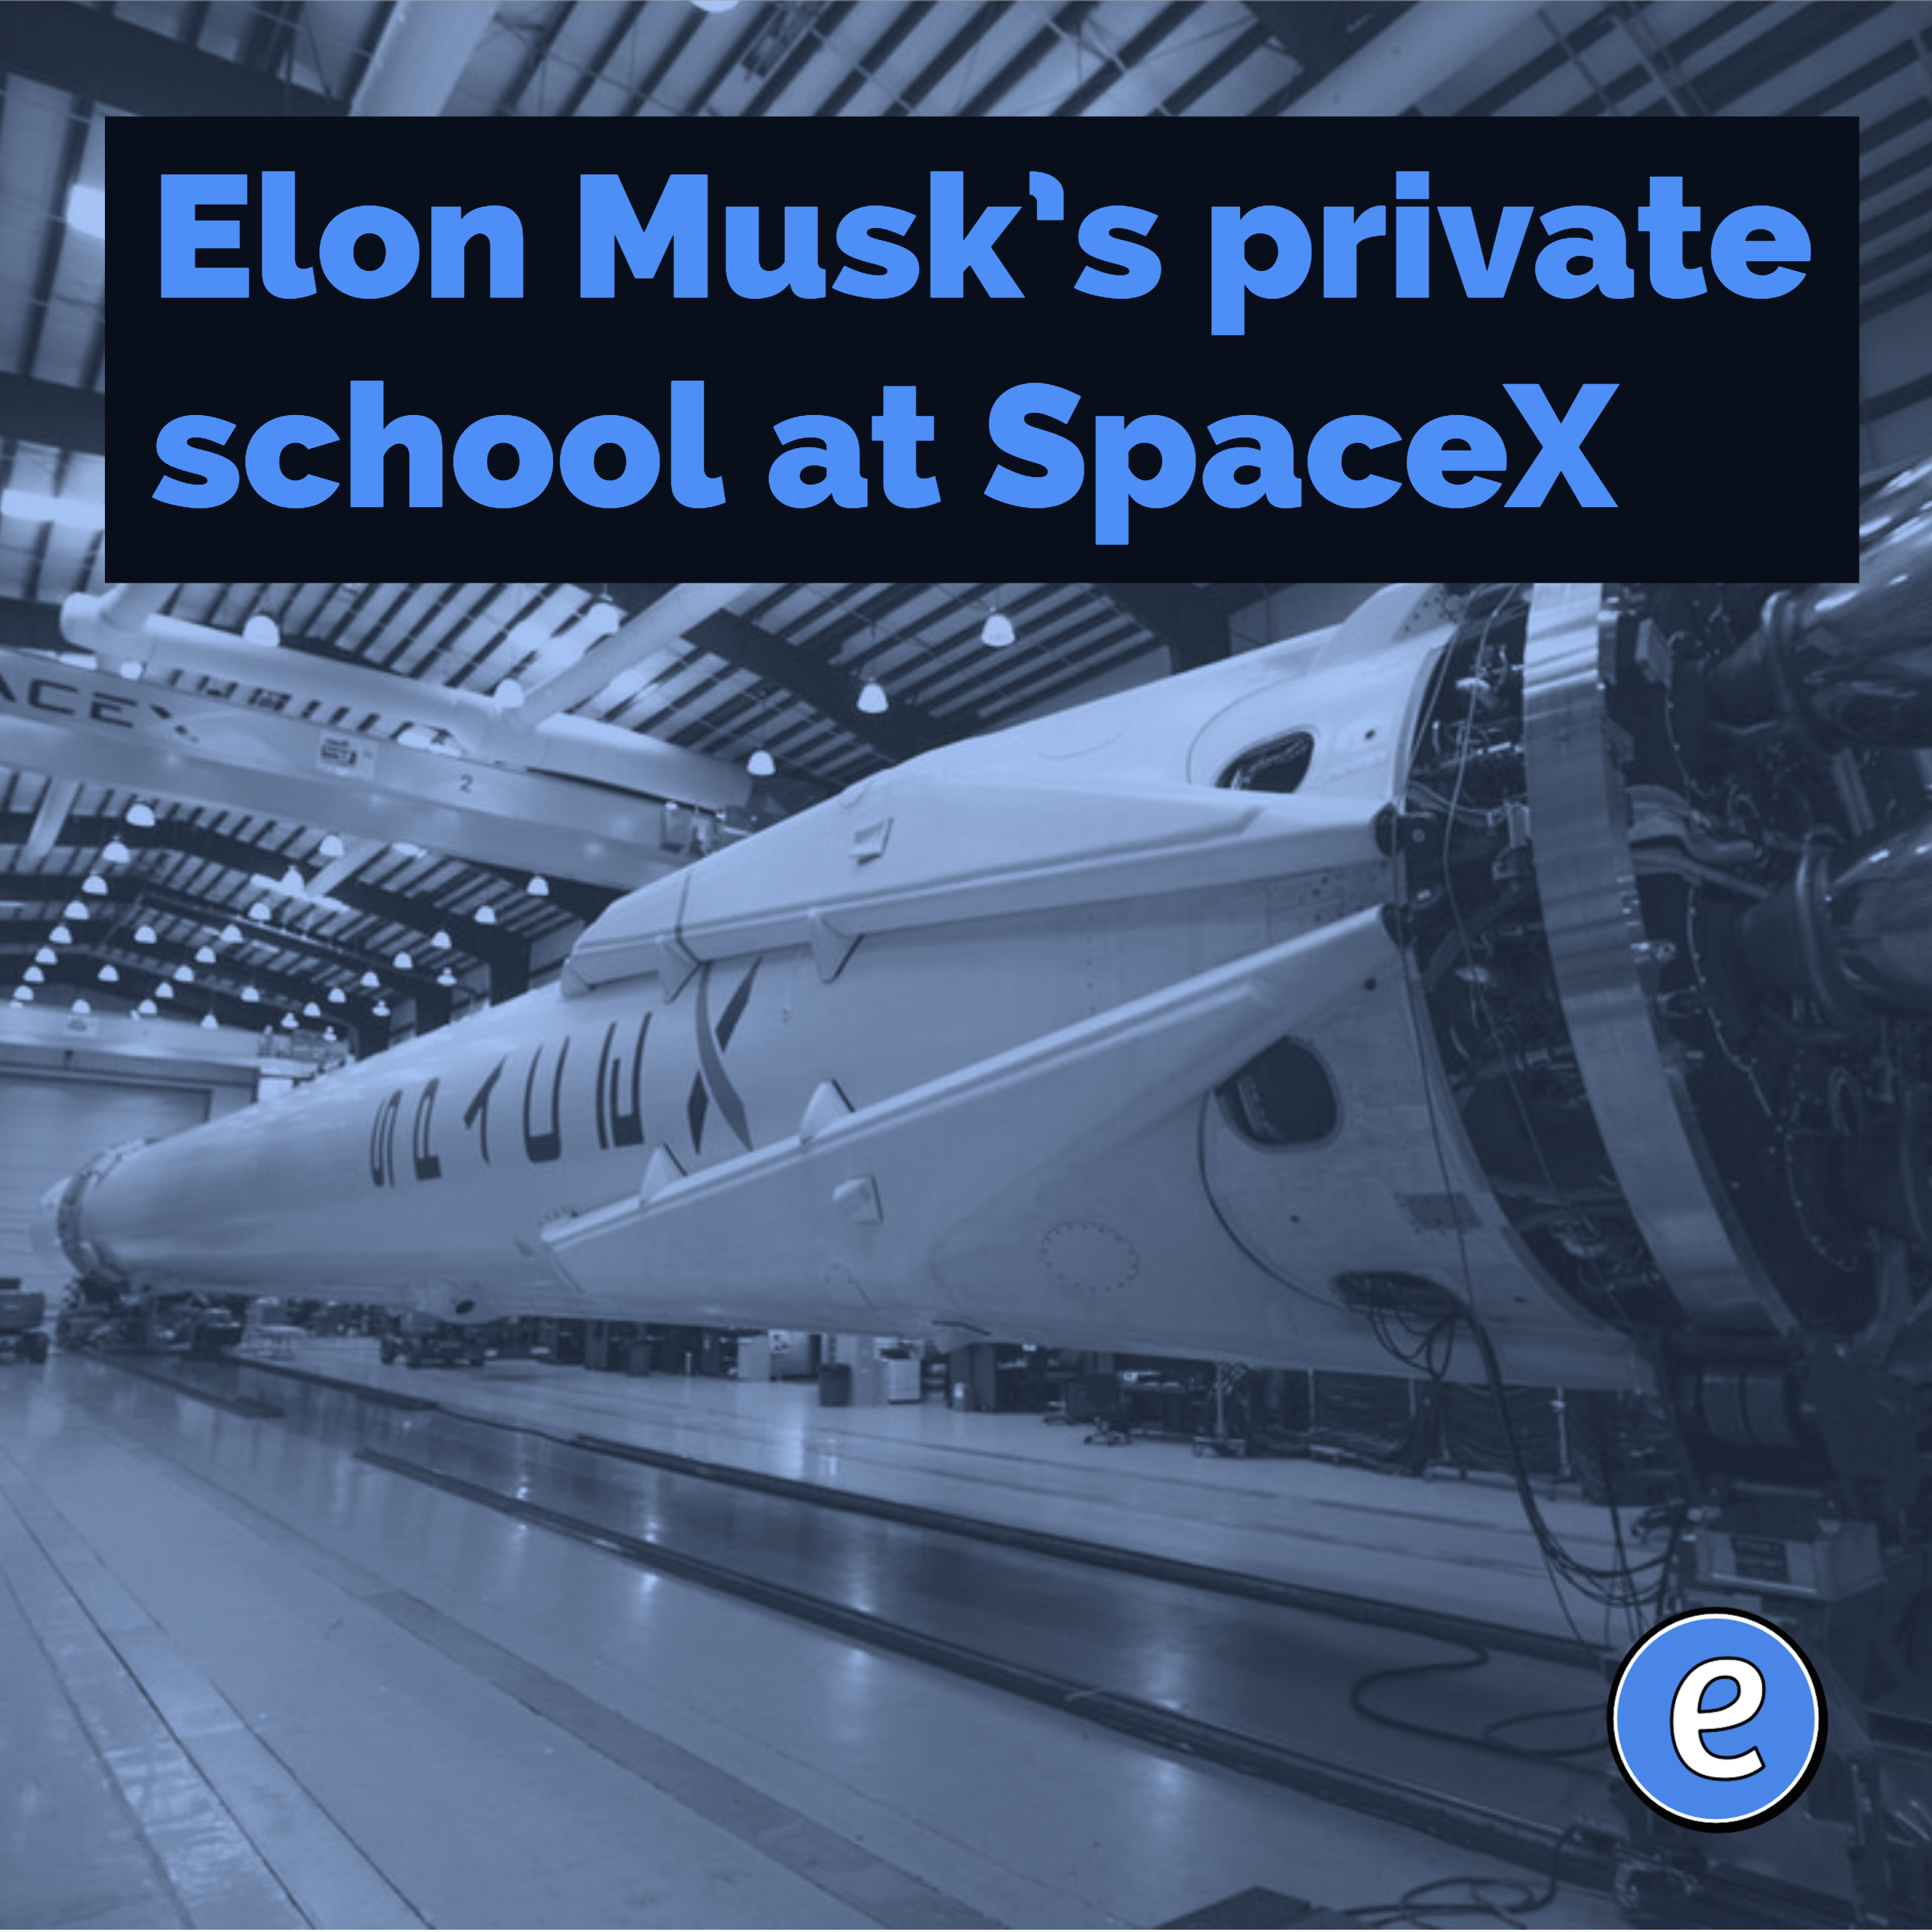 Elon Musk’s private school at SpaceX